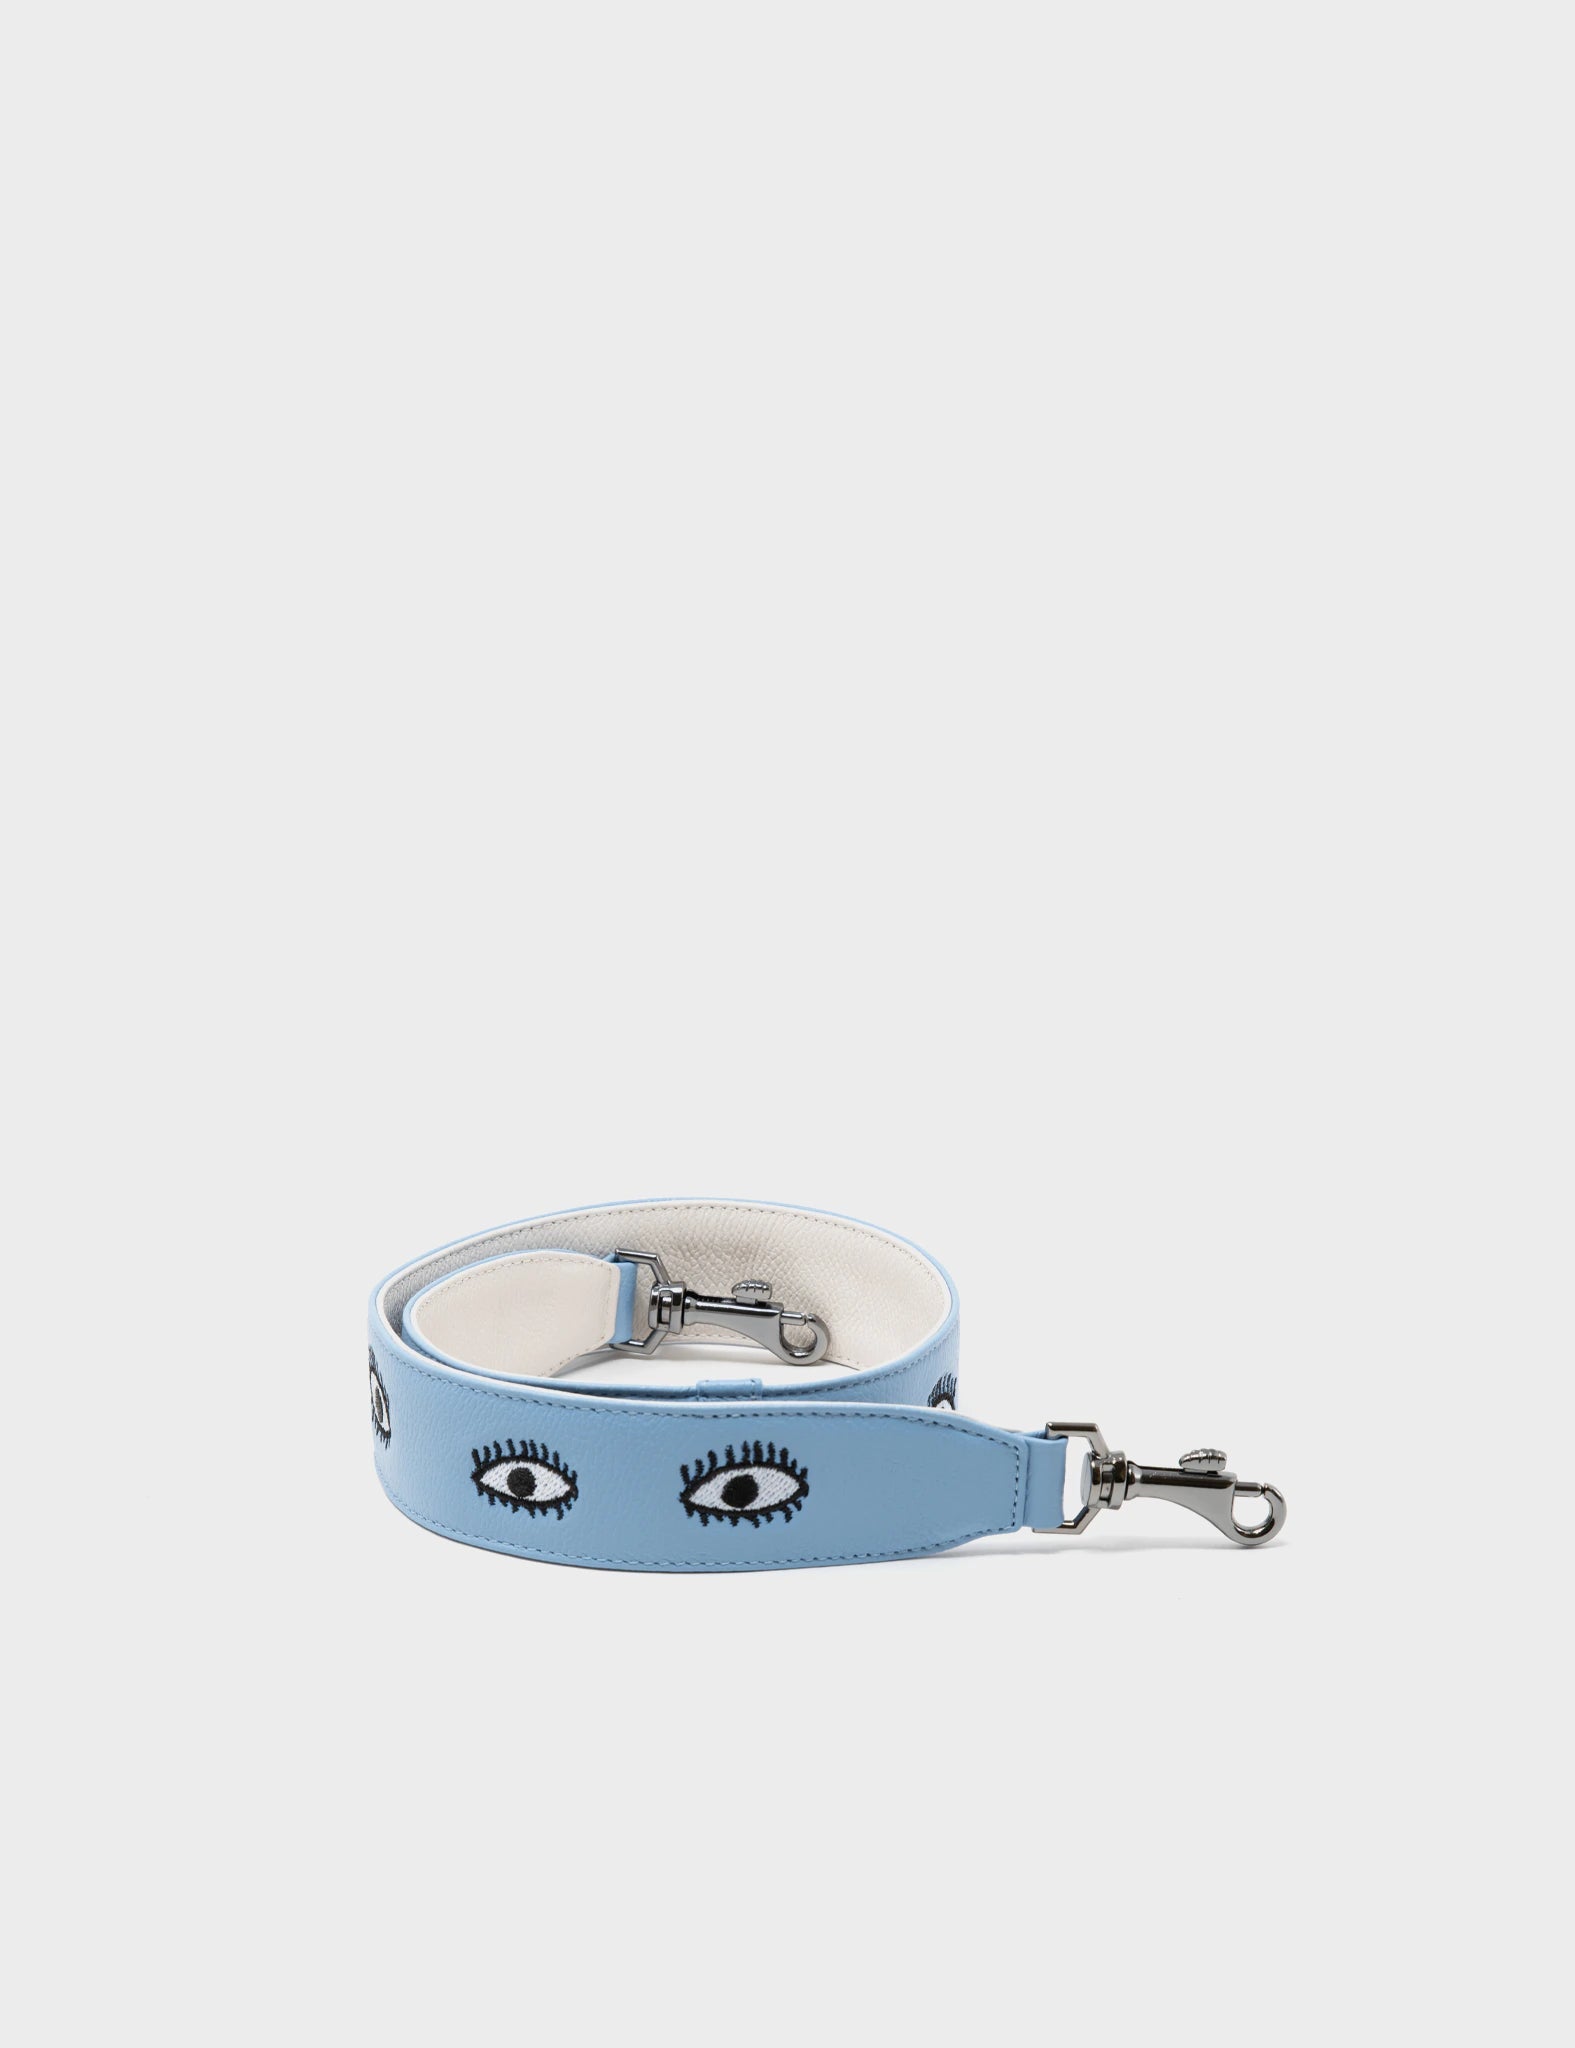 Detachable Short Sky Blue Leather Strap | Eyes Embroidery Design